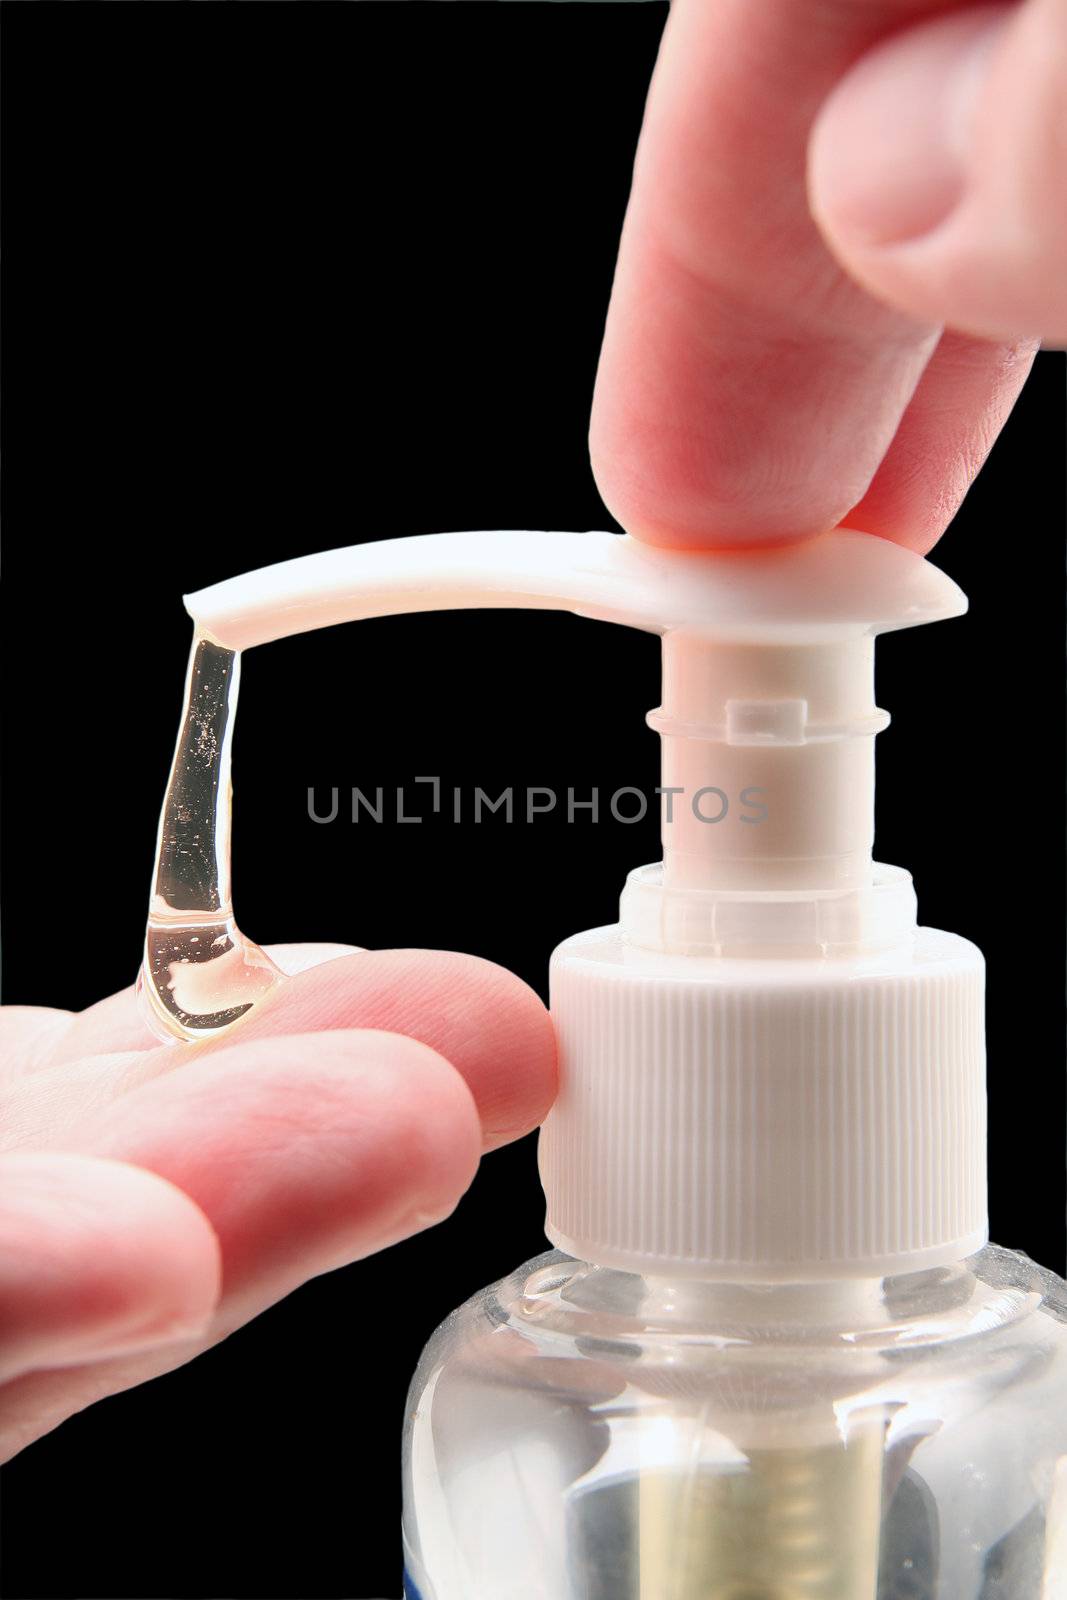 Man helping himself to a dollop of antibacterial soap, close up of hands